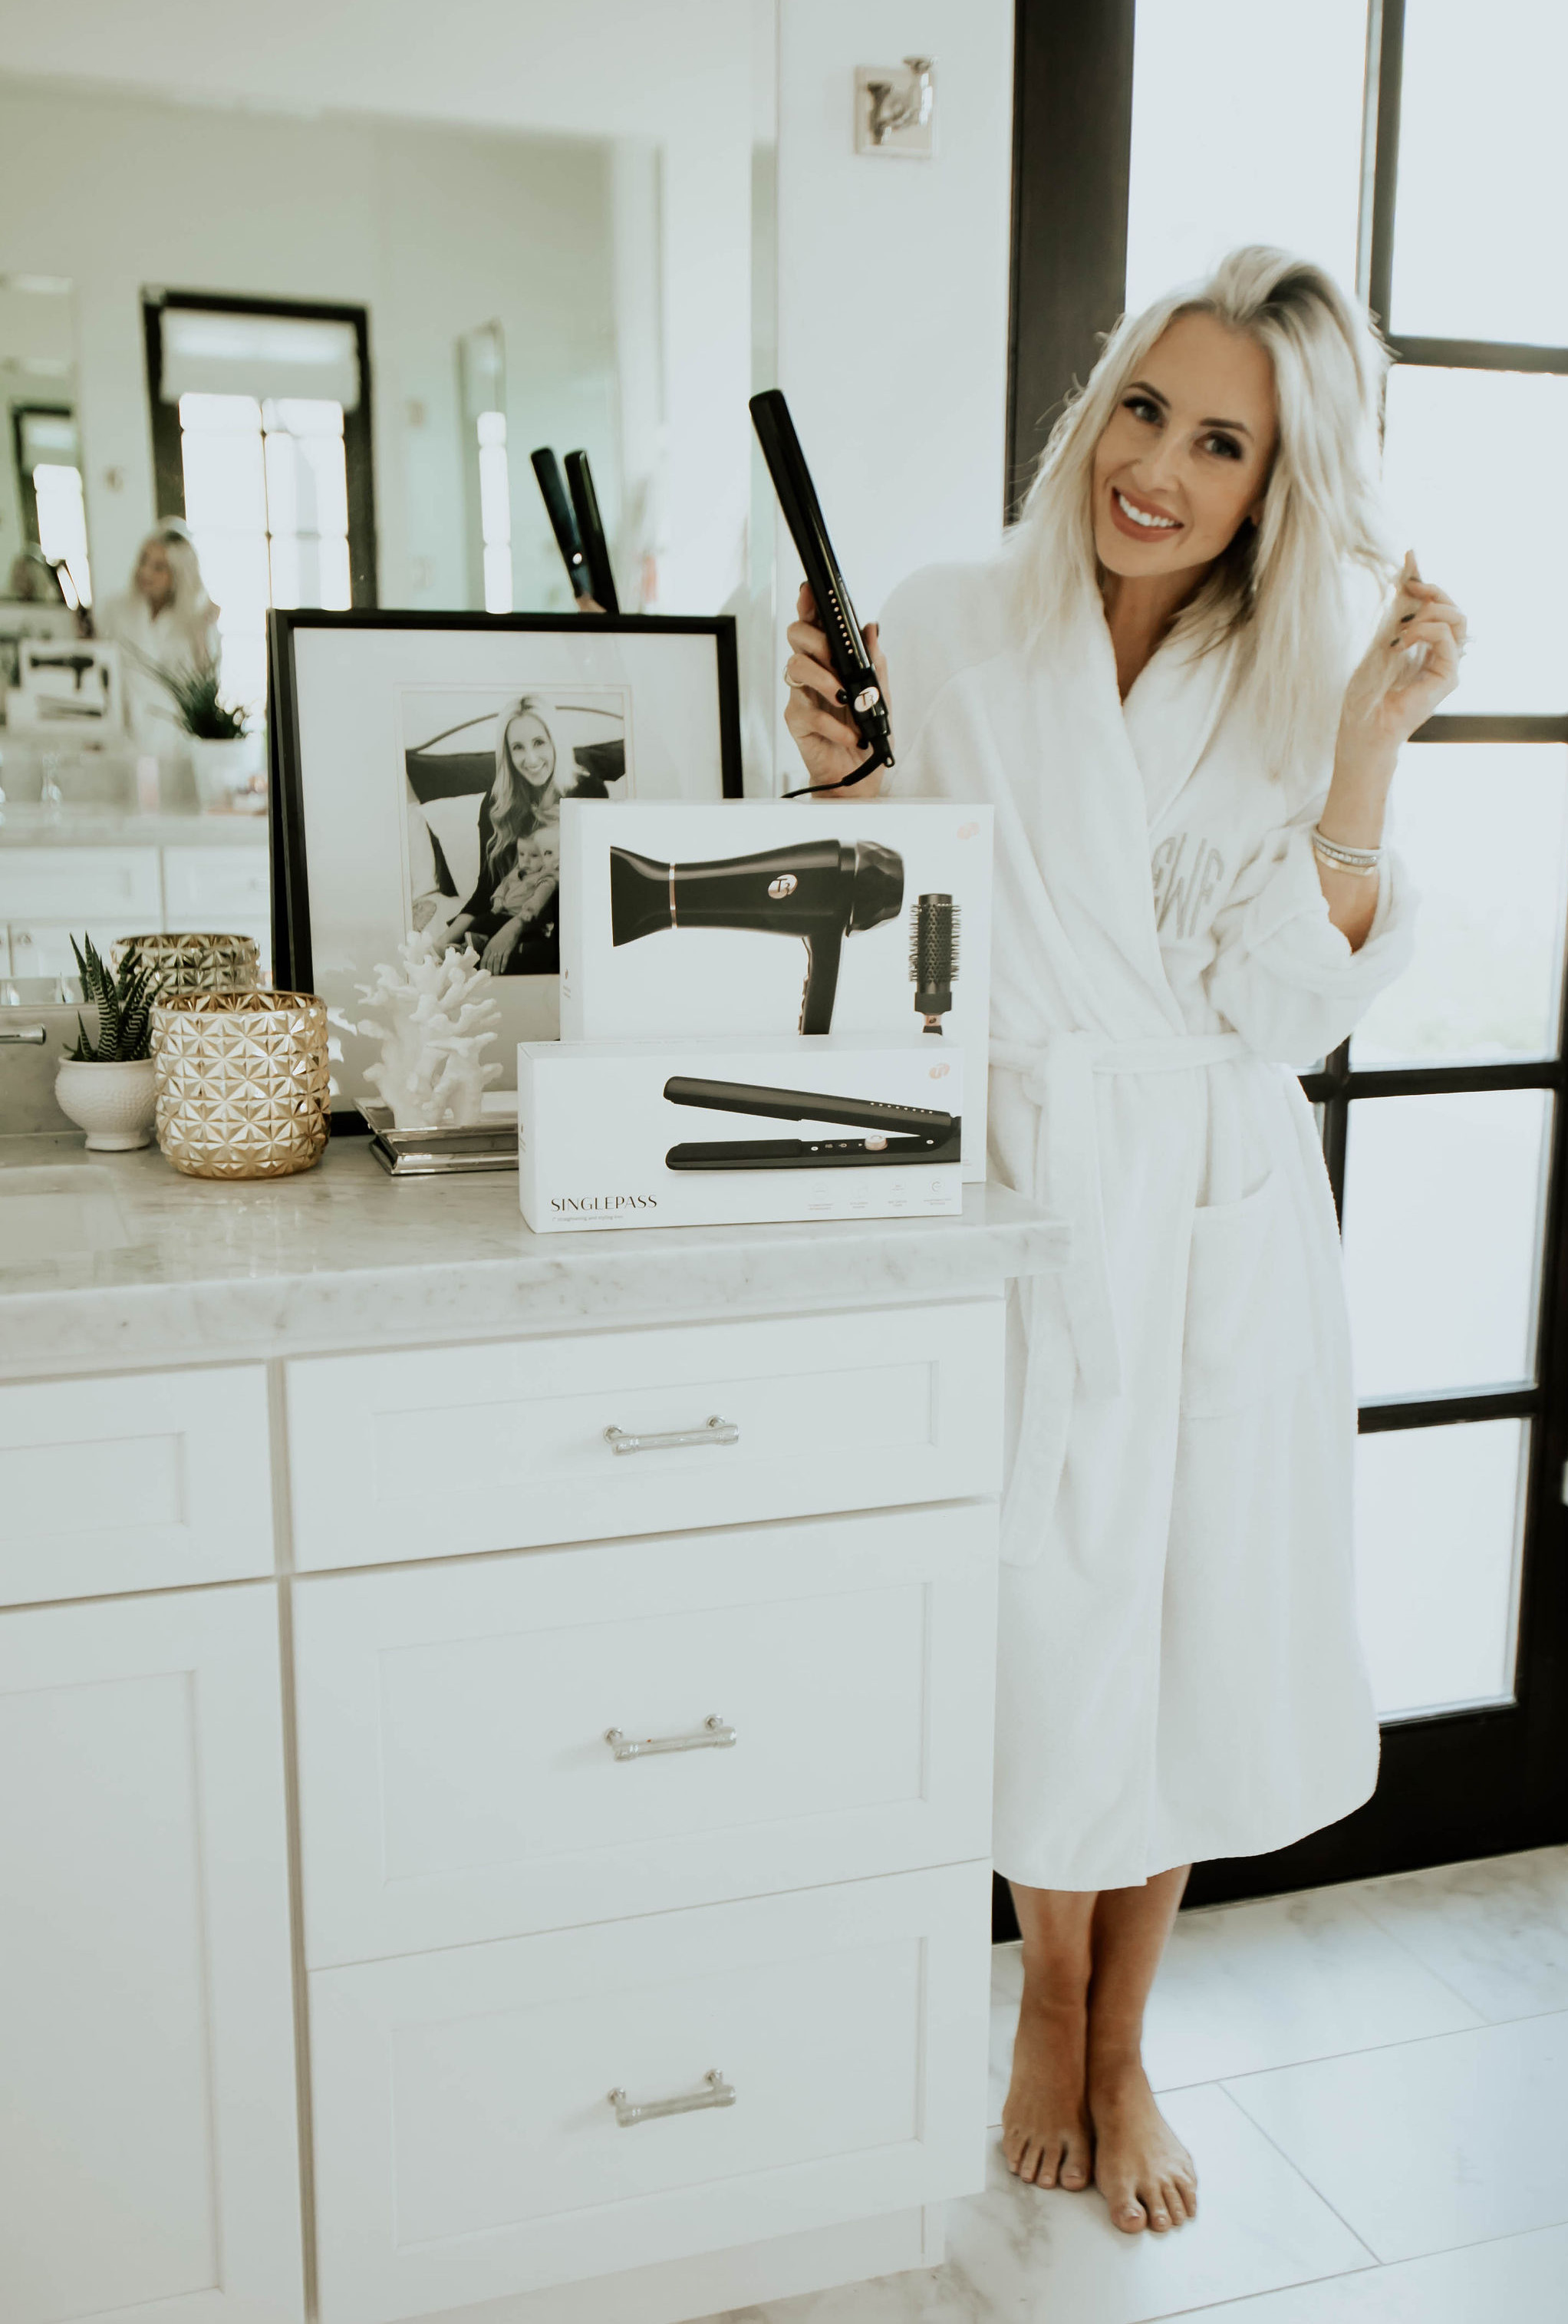 Reno, Nevada Blogger, Emily Farren Wieczorek shares How To Curl Your Hair With A Straightener - a step by step tutorial and a HUGE QVC deal on T3 Hair Tools.